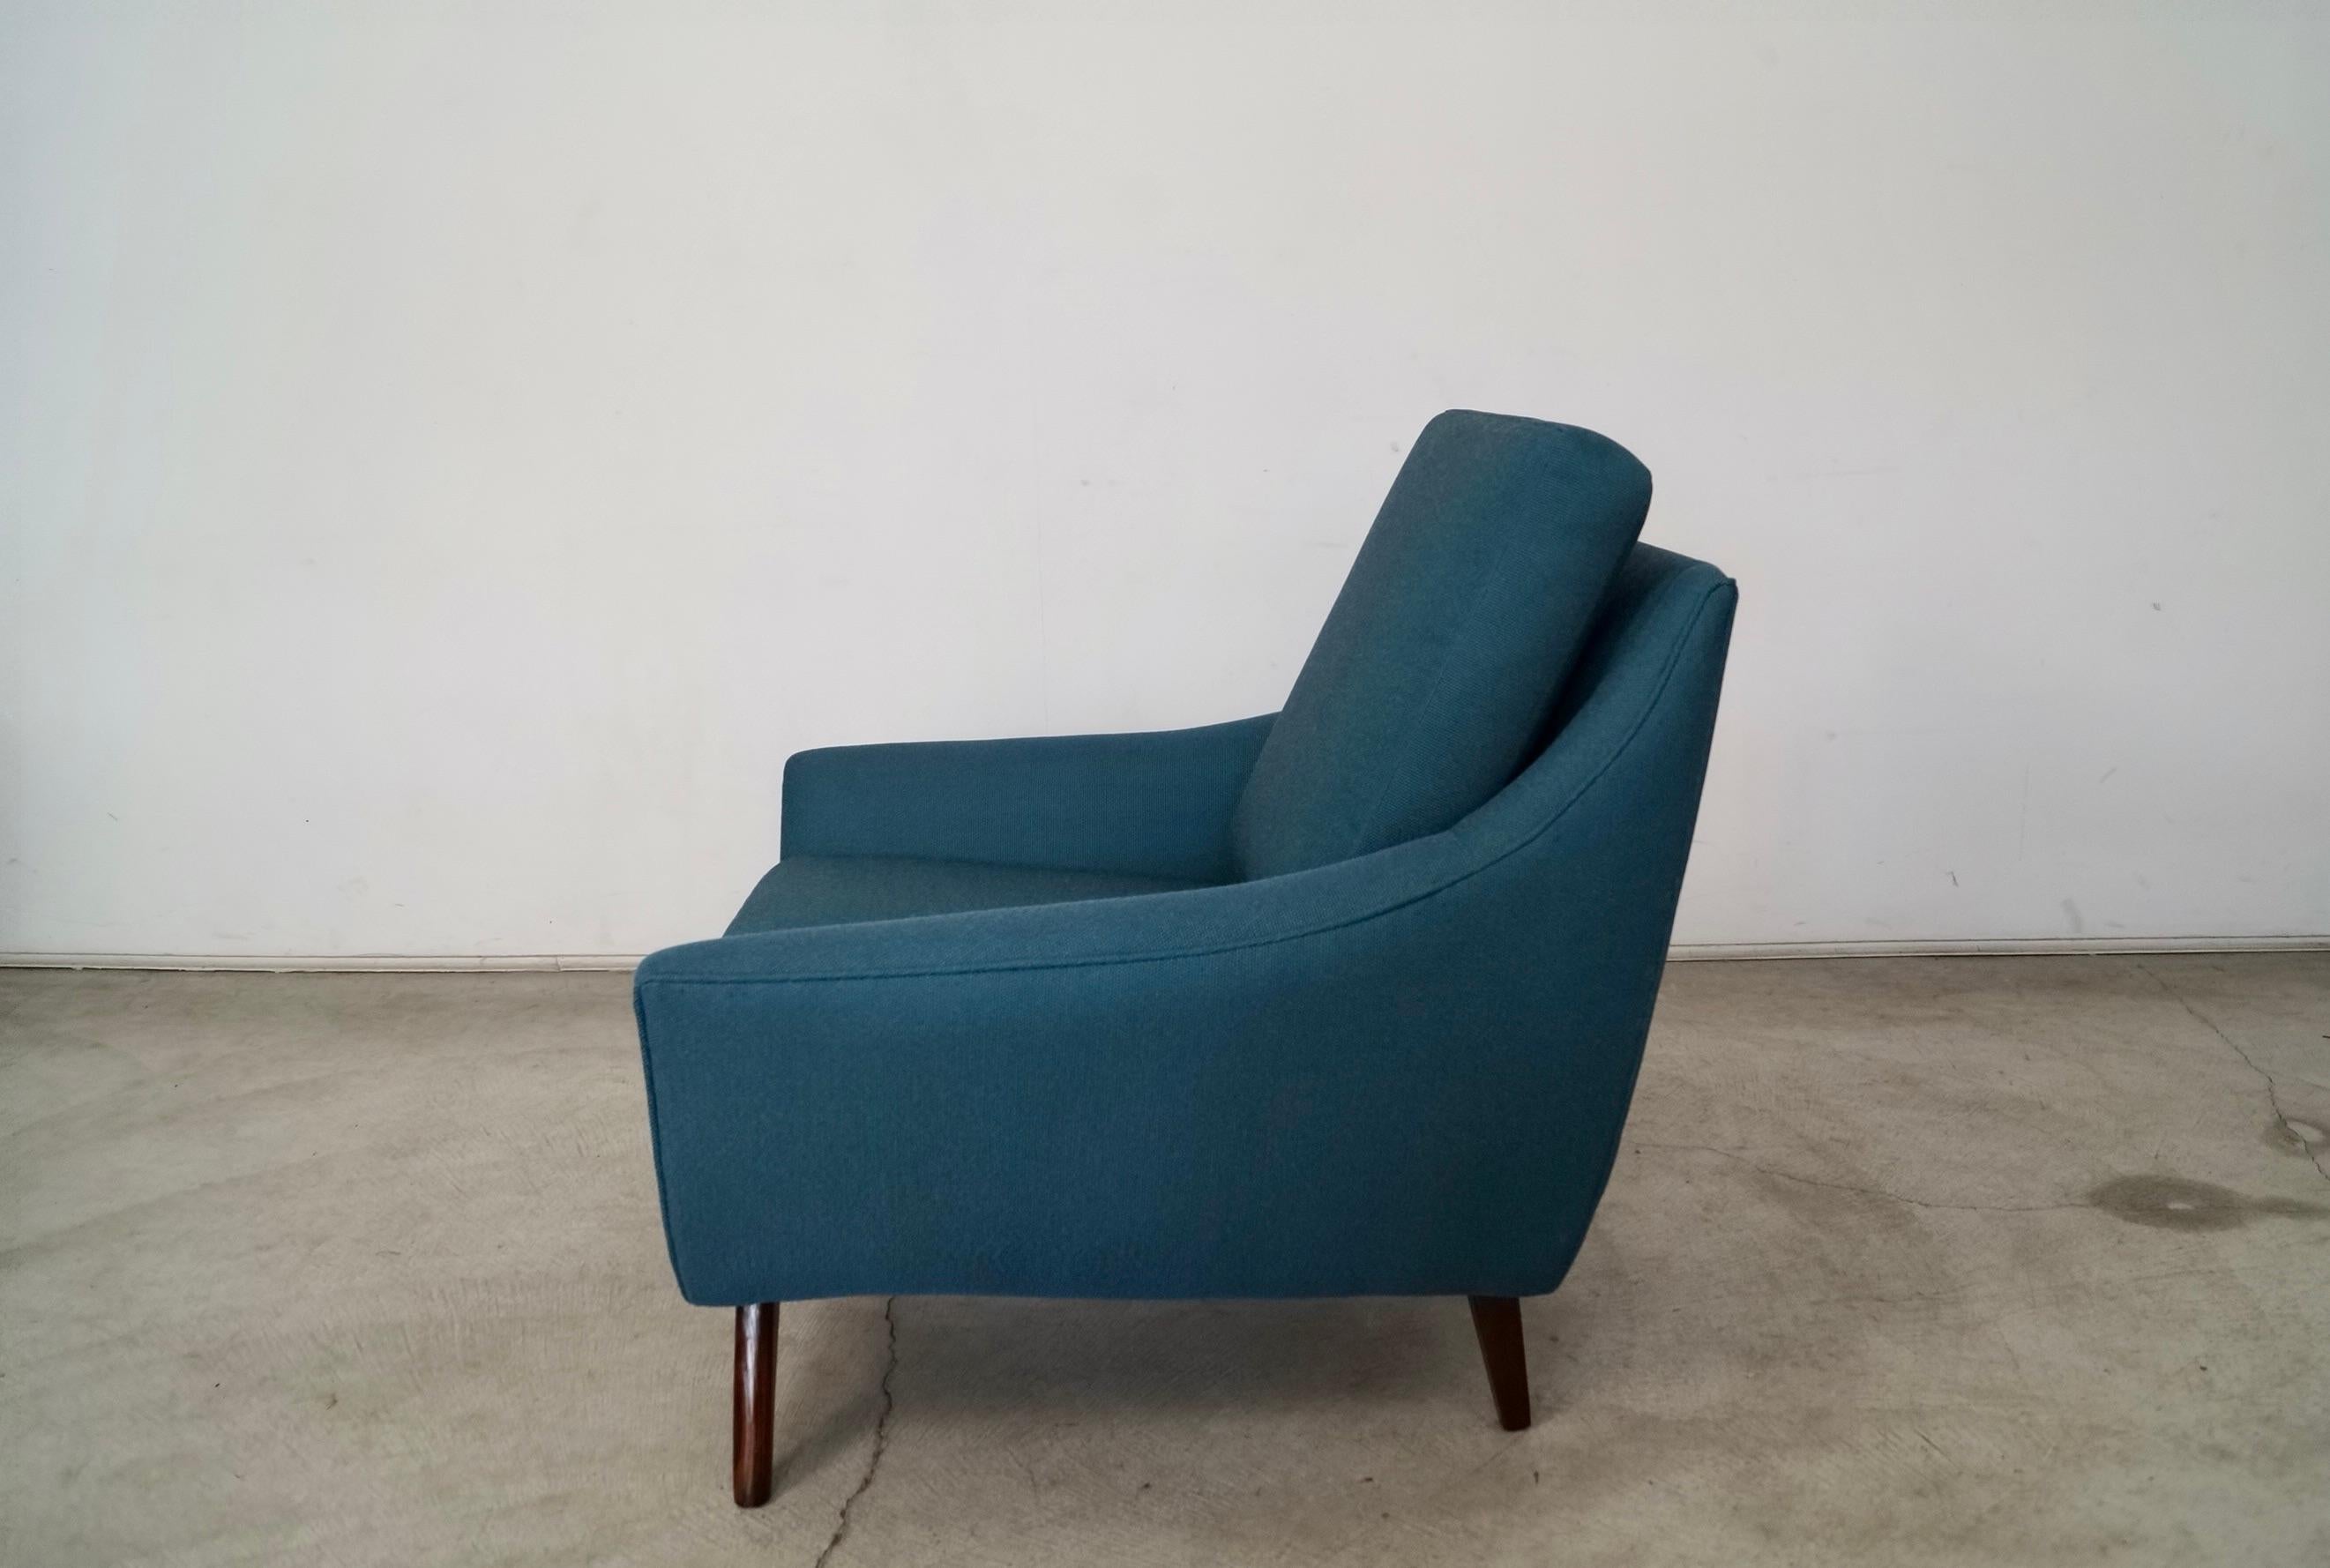 Fabric 1960's Mid-Century Modern Adrian Pearsall Style Prestige Gondola Lounge Chair For Sale